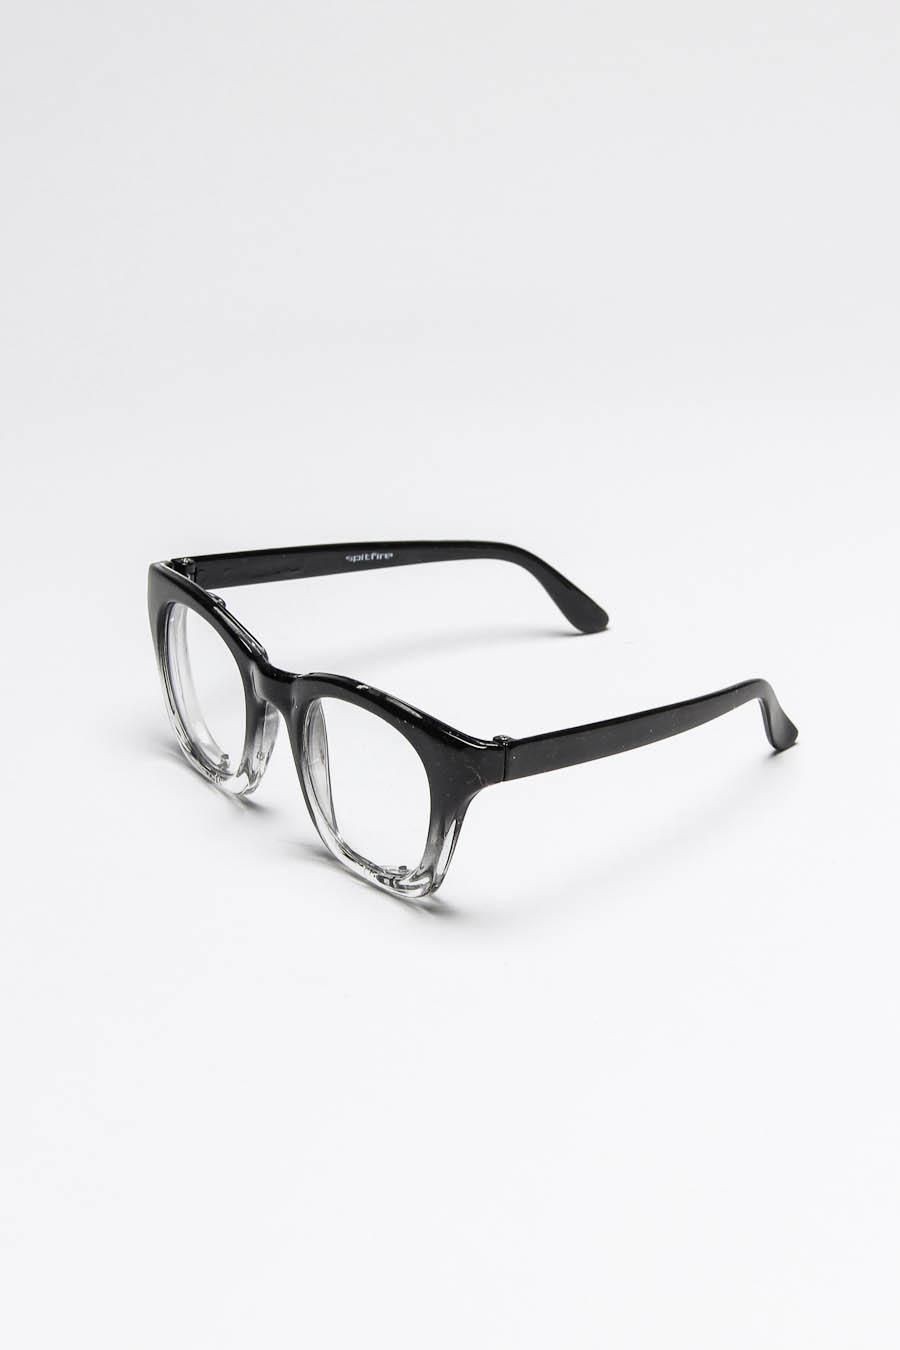 Black and clear frame glasses: Nerdy Glasses,  Warby Parker  